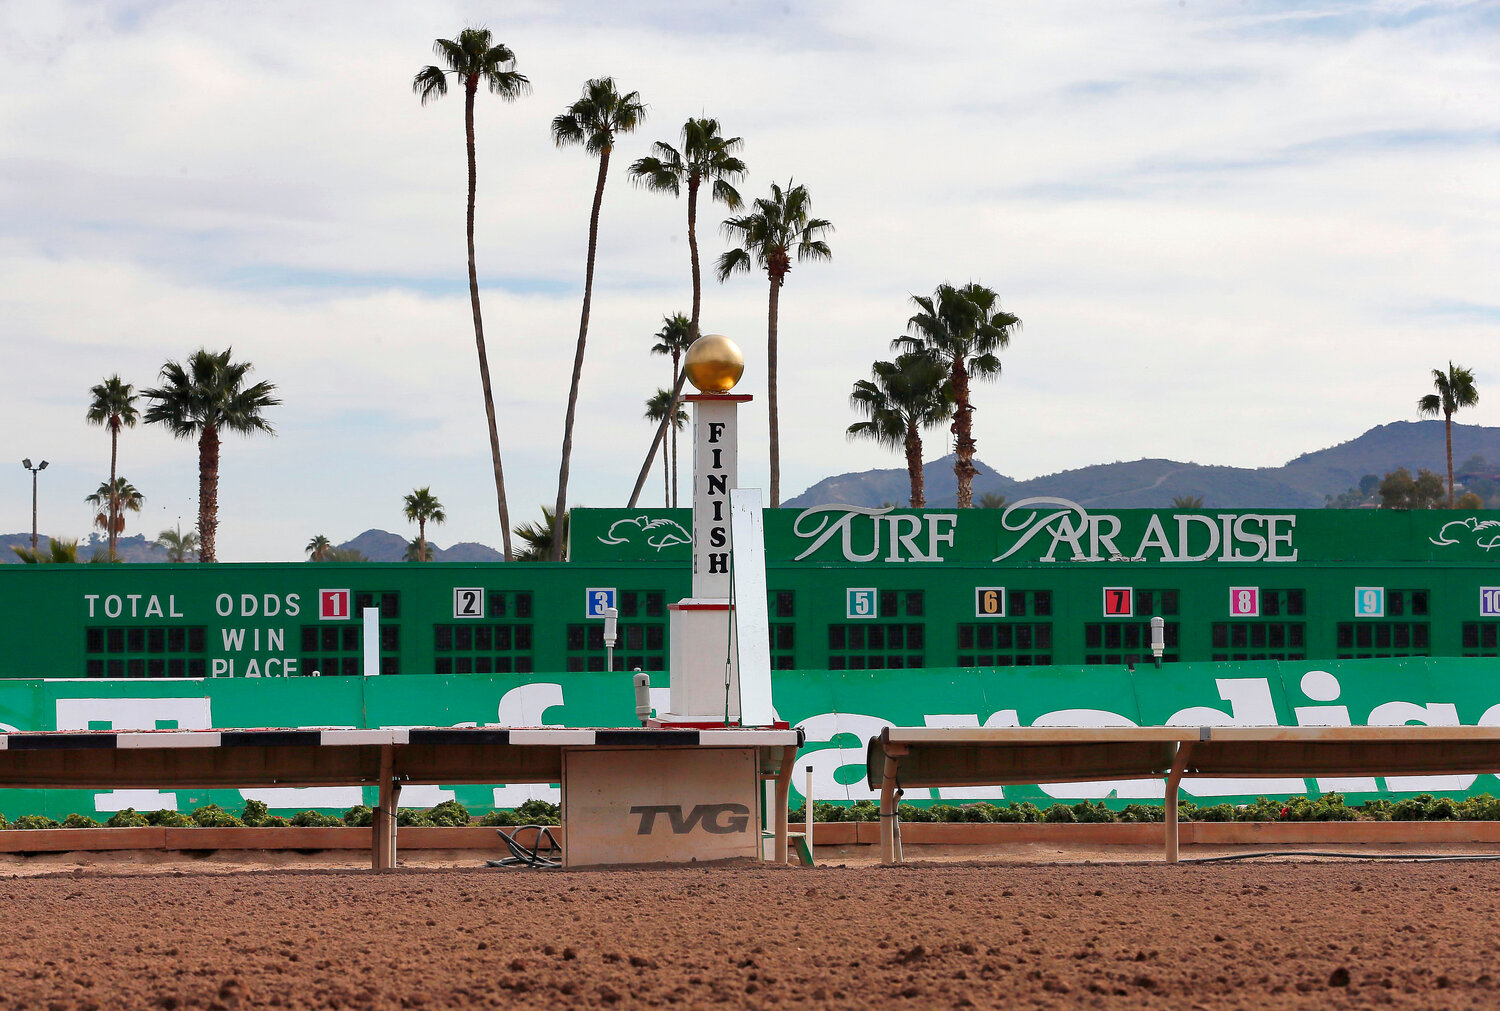 The finish line of the horse racing track at Turf Paradise is seen, Friday, Jan. 29, 2016, in Phoenix. Turf Paradise, a race track that has been a staple of horse racing in Arizona for decades, will resume live racing in January.